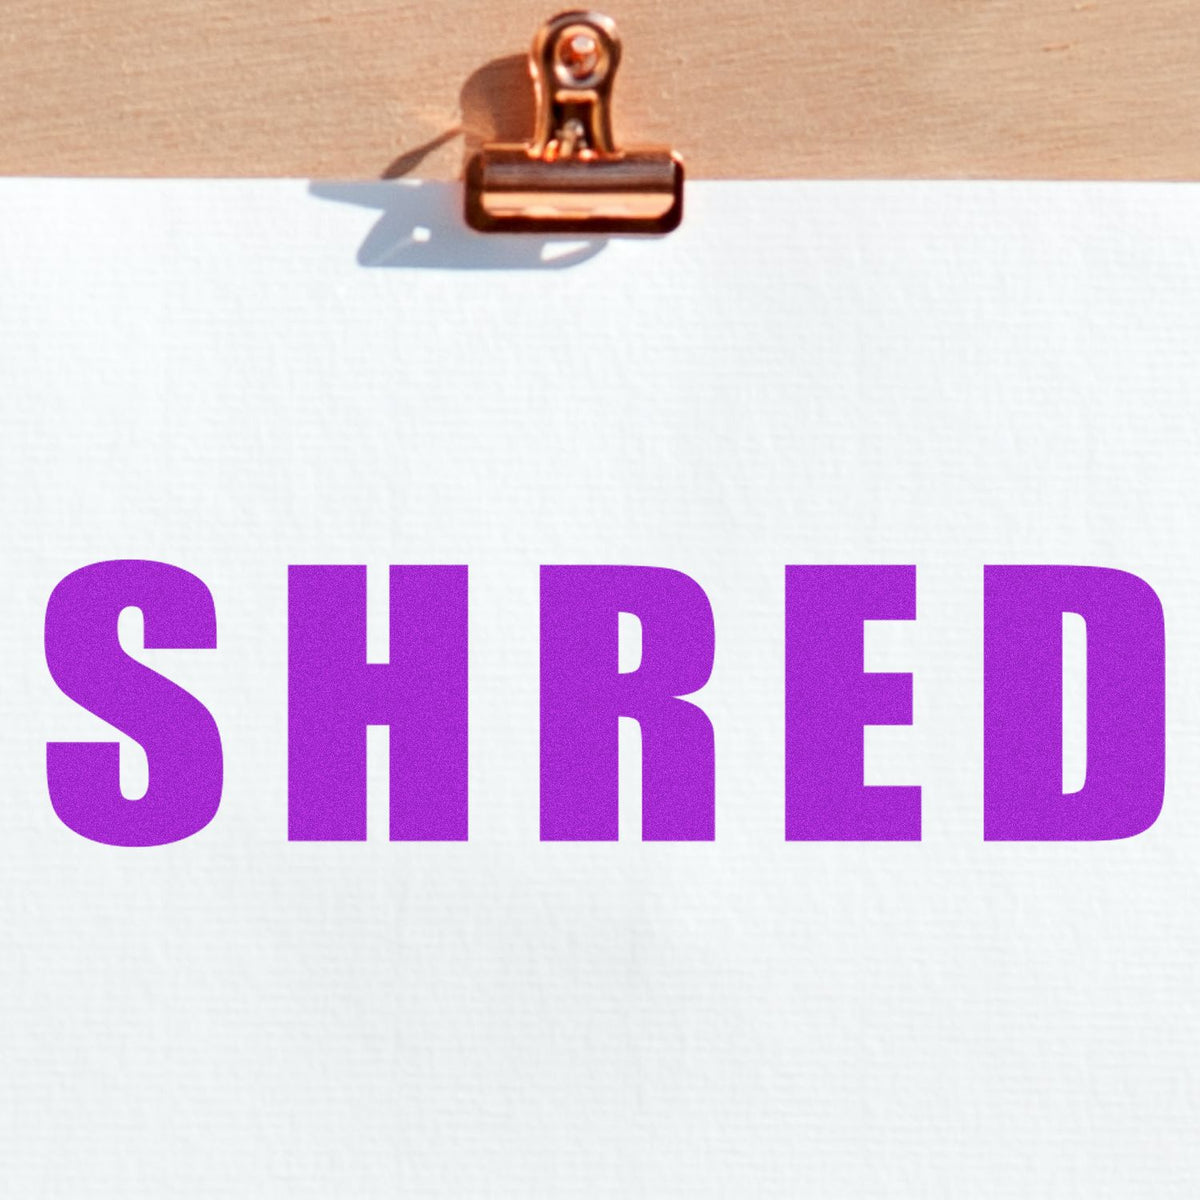 Bold Shred Rubber Stamp In Use